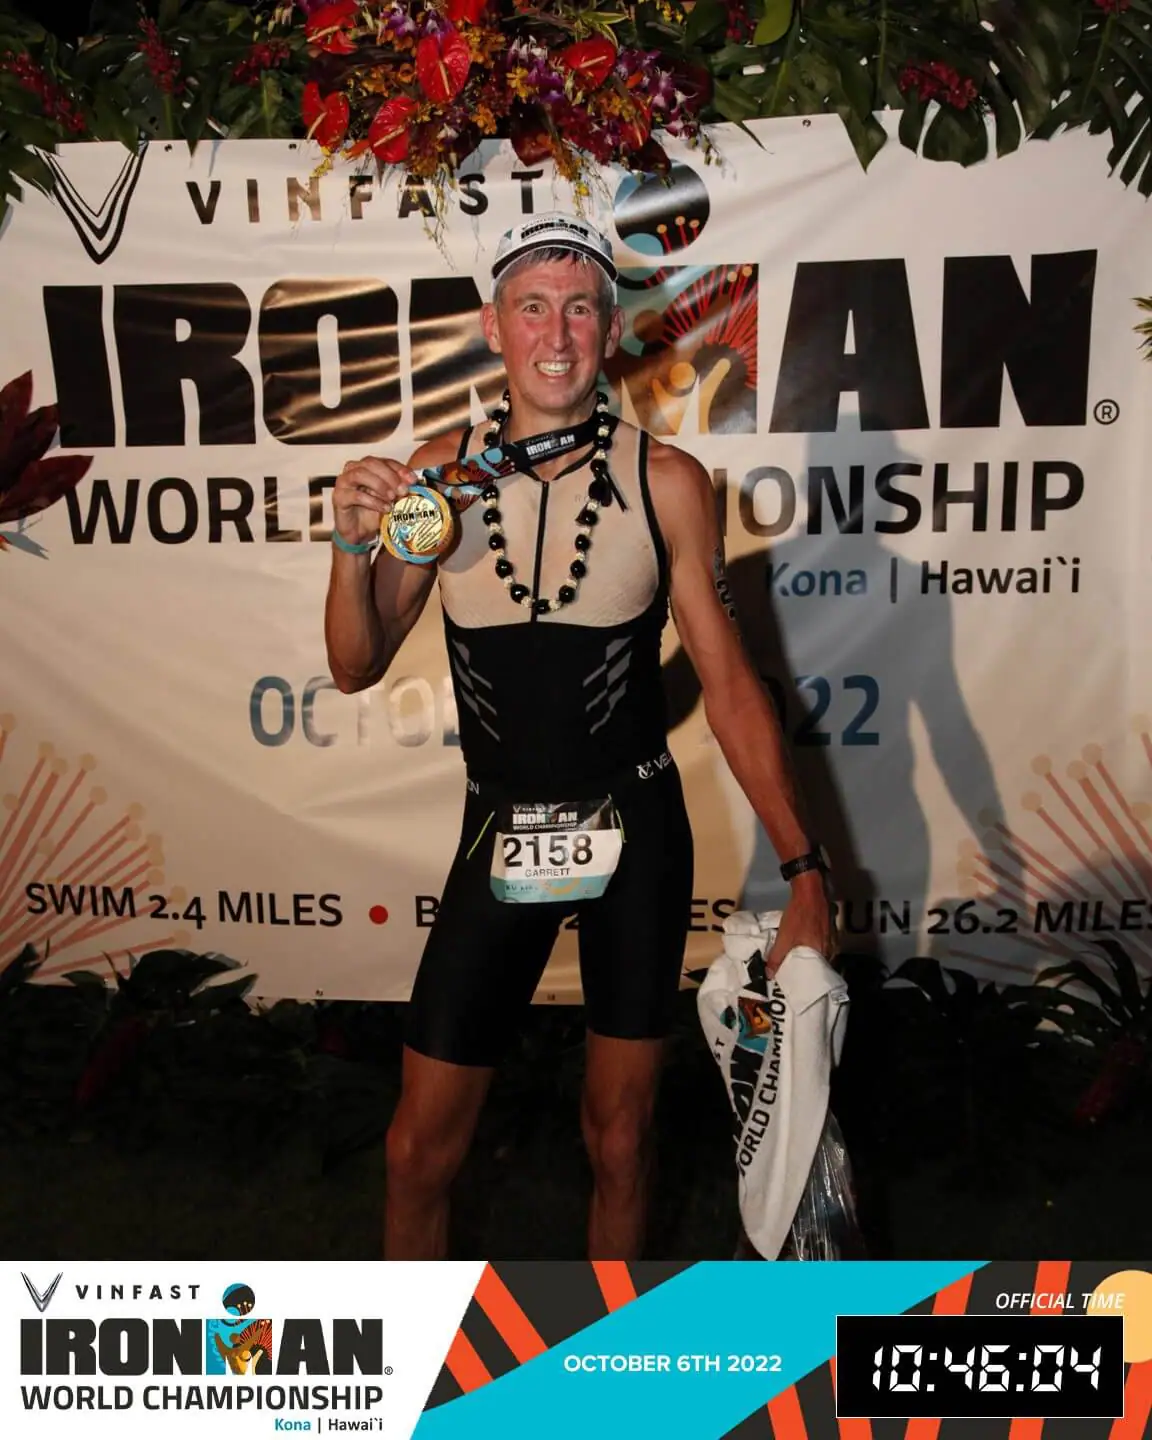 Dr. Garrett Moss in front of the IronMan World Championship sign, with a medal around his neck. Bottom of the image has the IronMan logo, the date: October 6, 2022, and his time listed as 10:46:04